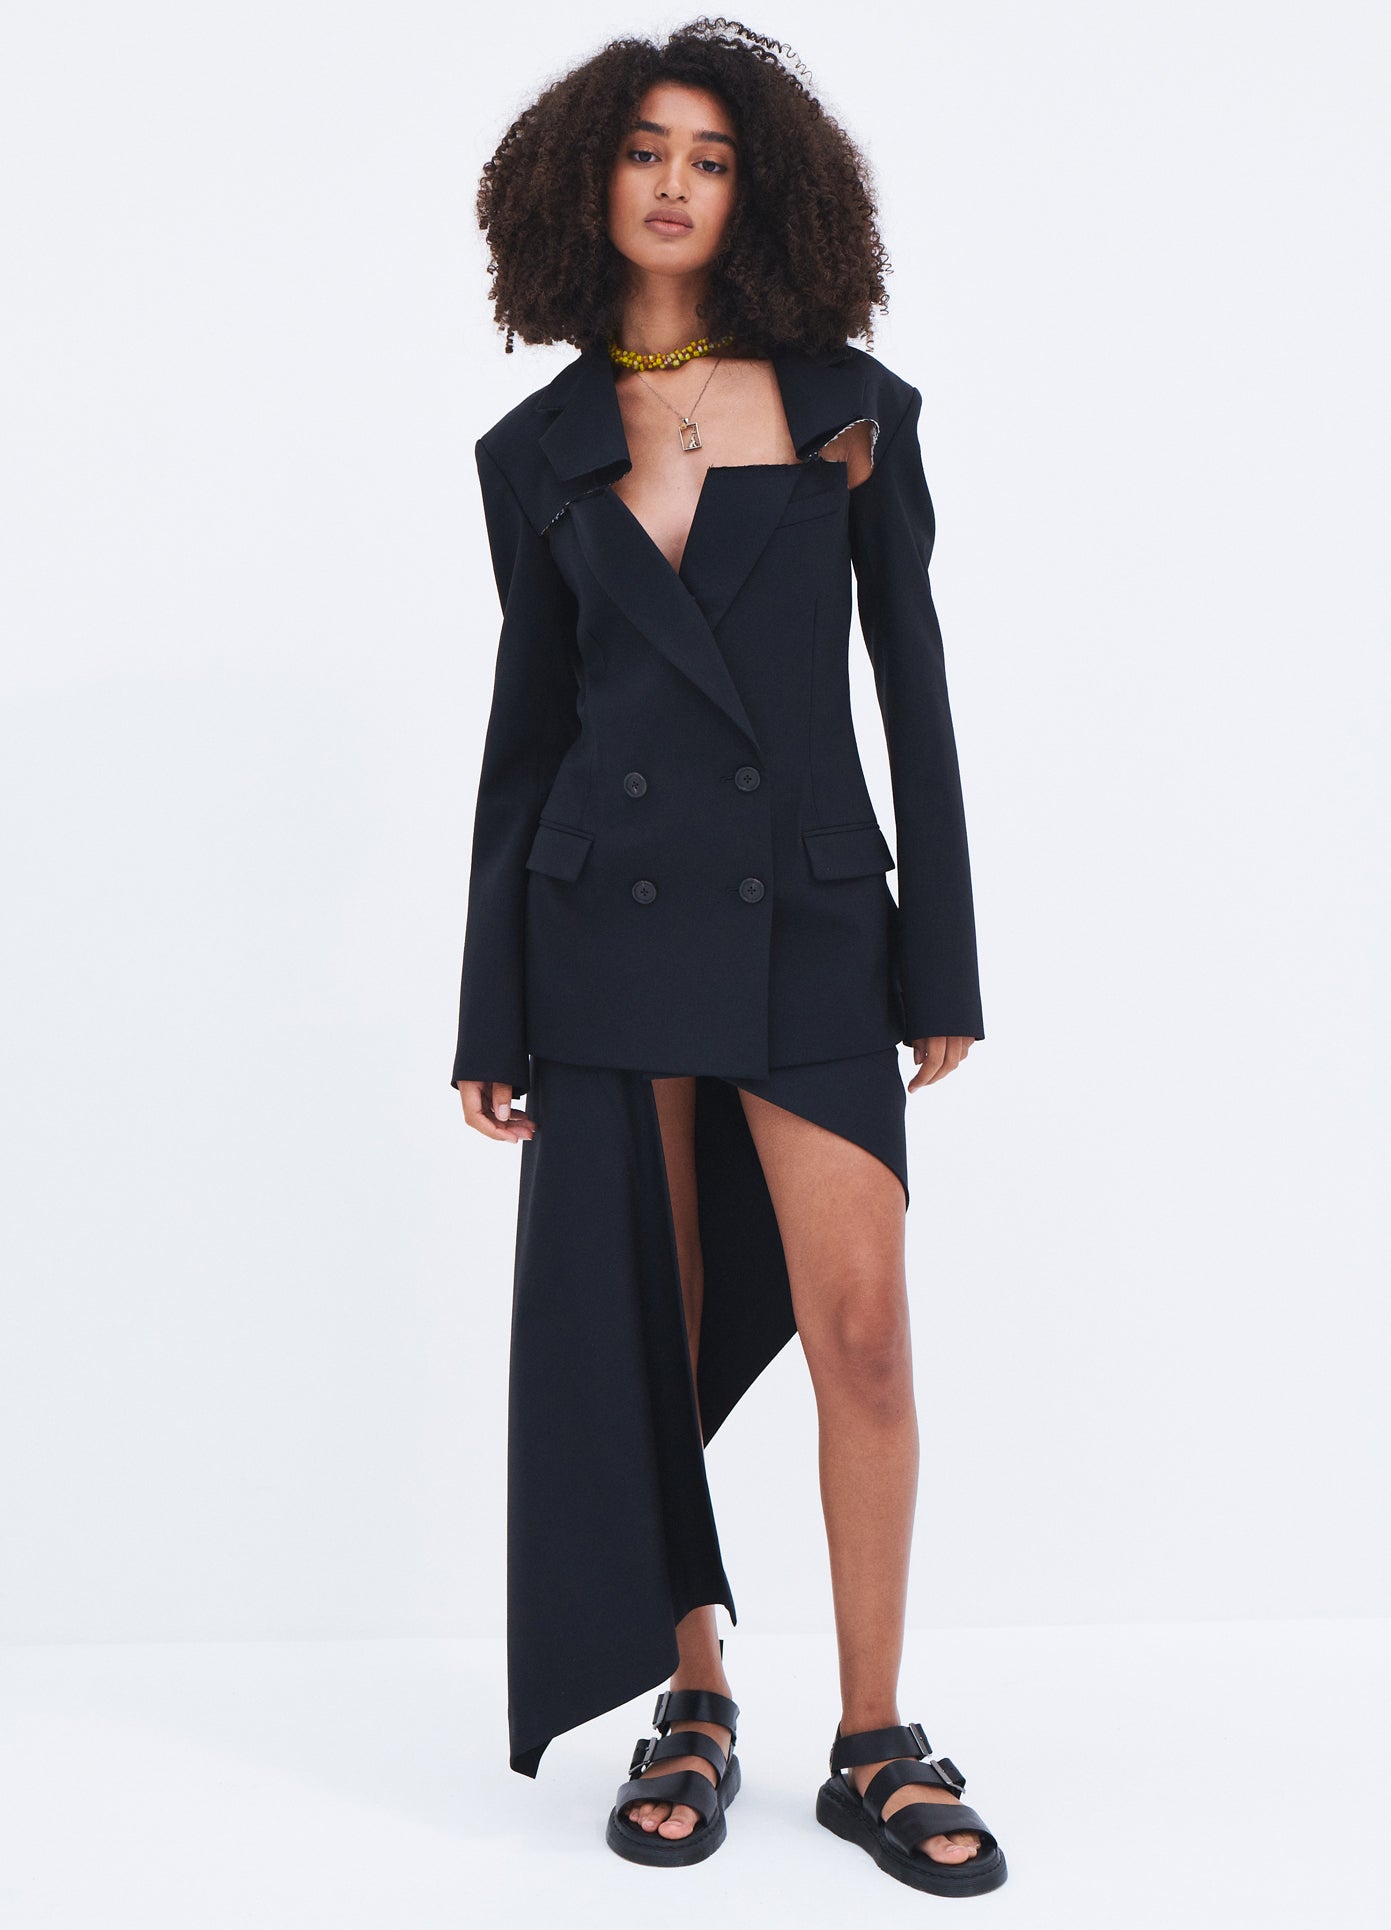 MONSE Slashed Two Piece Blazer in Black on model full front view